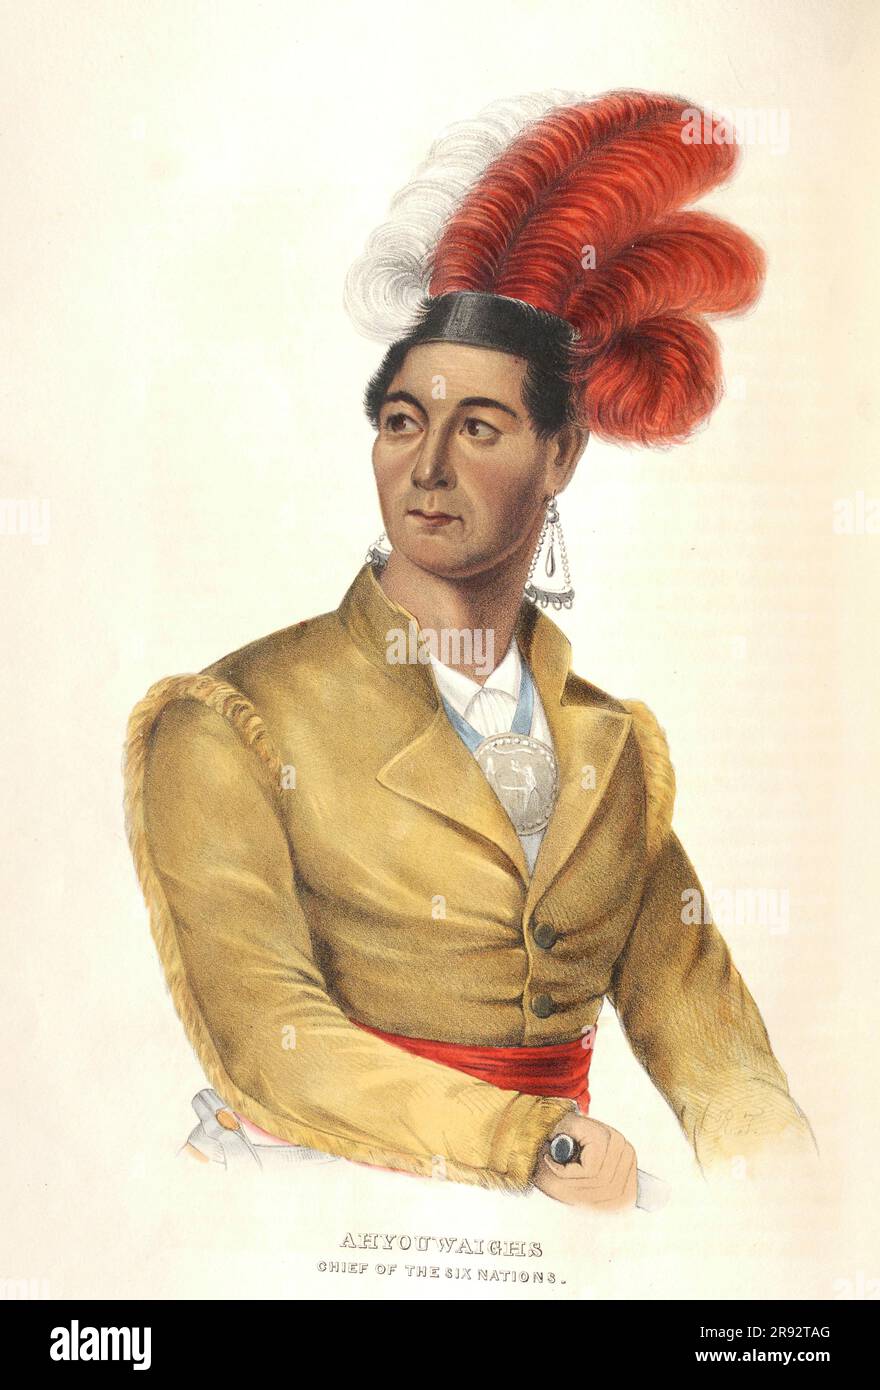 Ahyouwaighs (1794-1832), Chief of the Mohawks, and member of the Legislative Assembly of Upper Canada. Illustration. Stock Photo